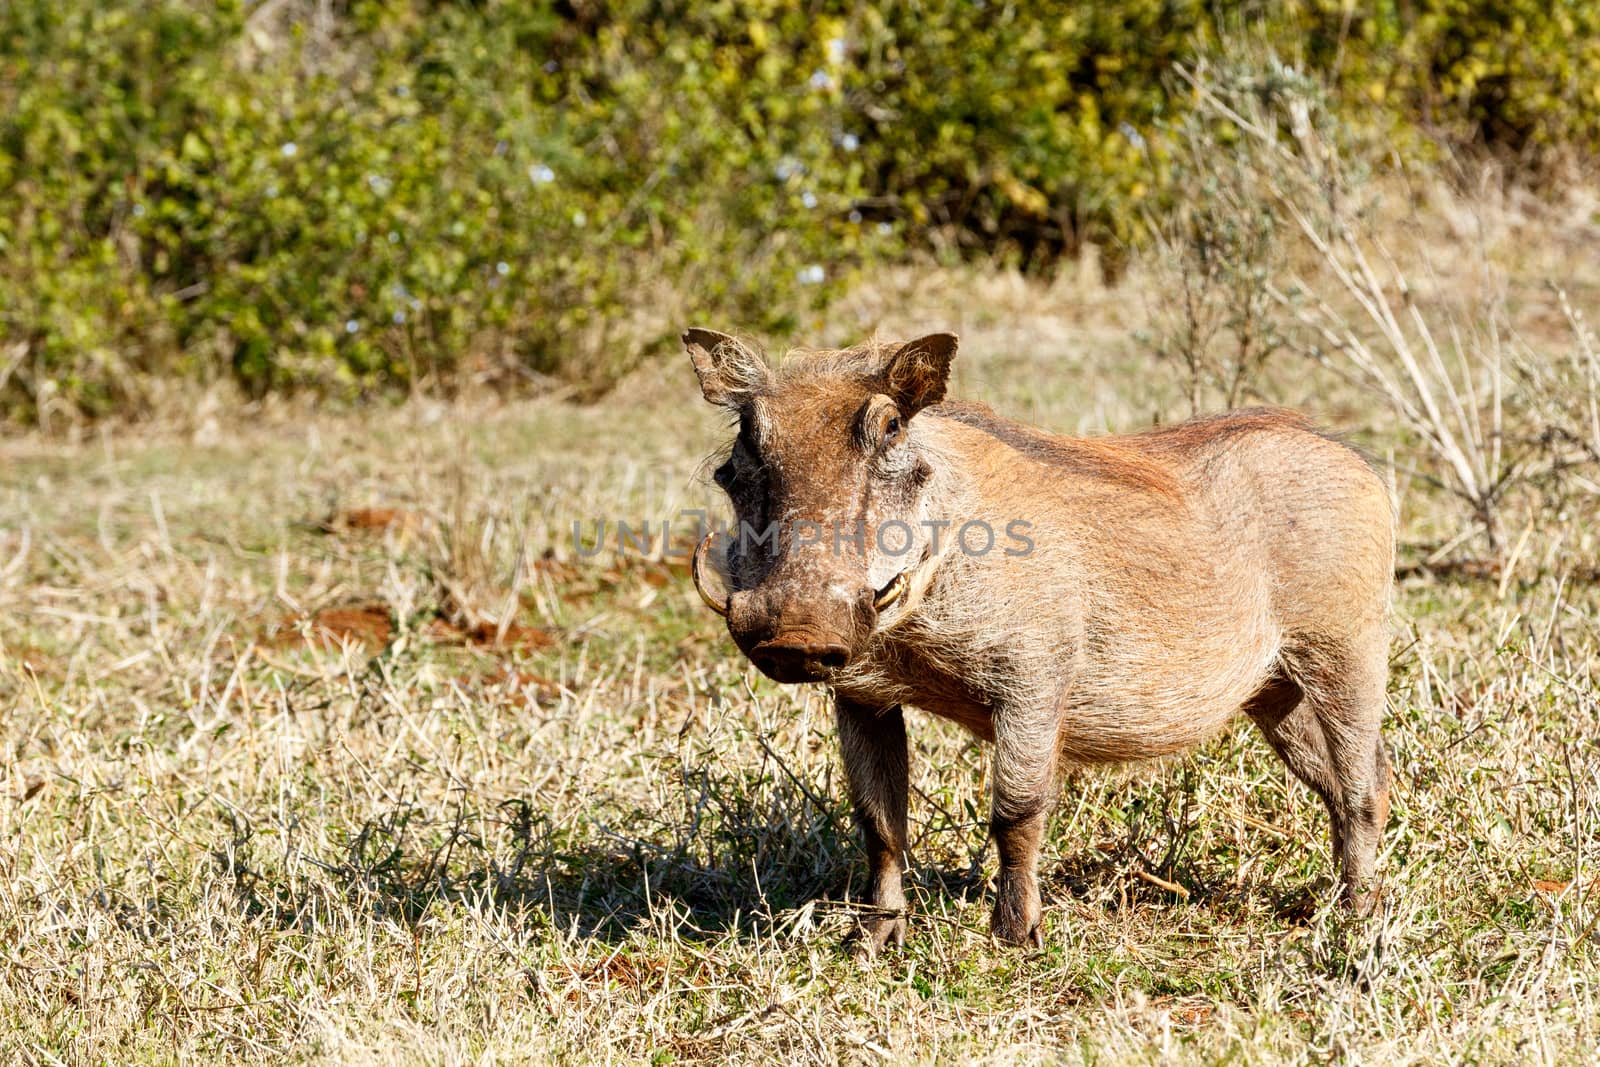 Warthog standing in grass with green srub and looking.